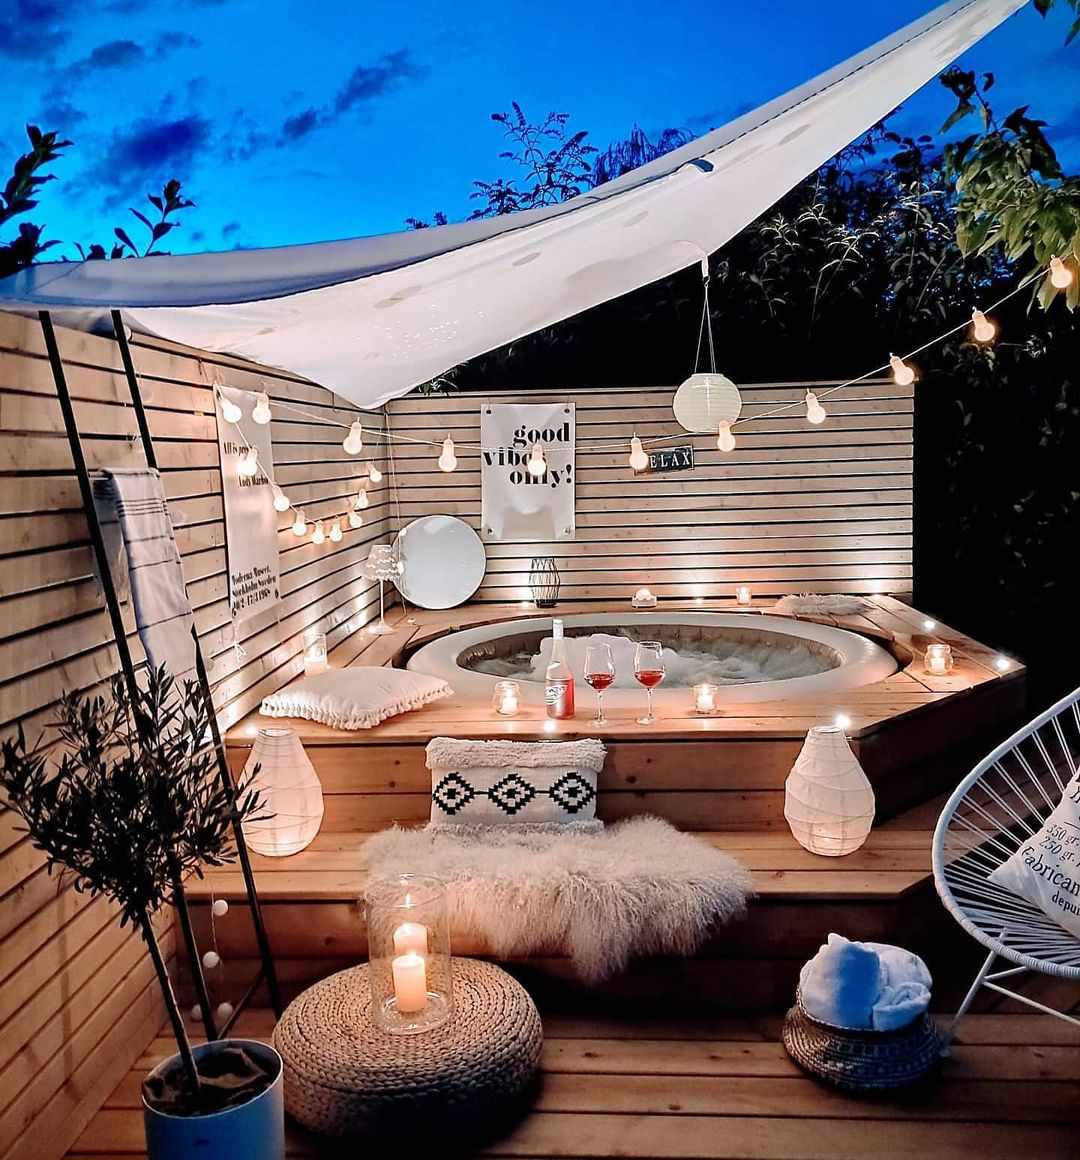 Sun shade with string lights over hot tub